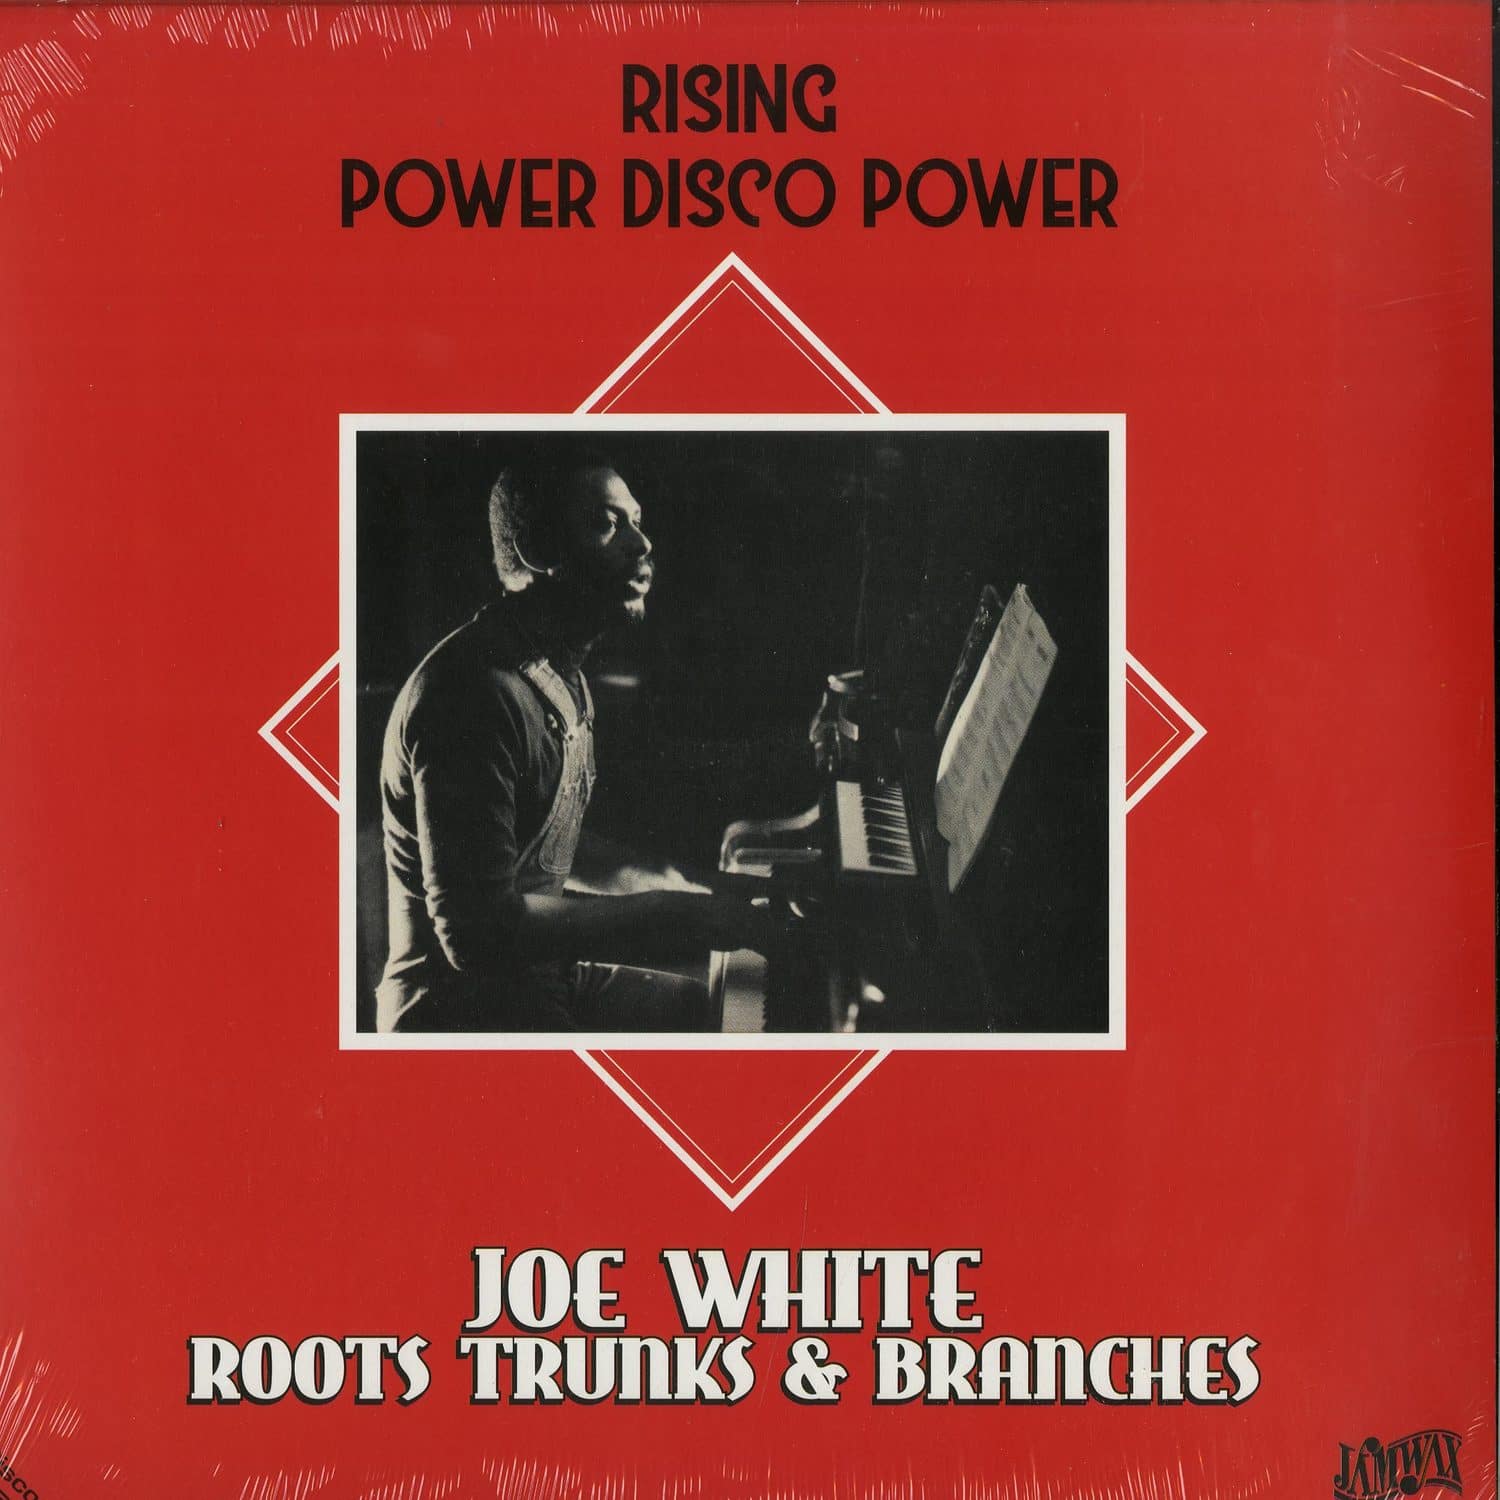 Joe White & Roots Trunks & Branches - RISING / POWER DISCO POWER